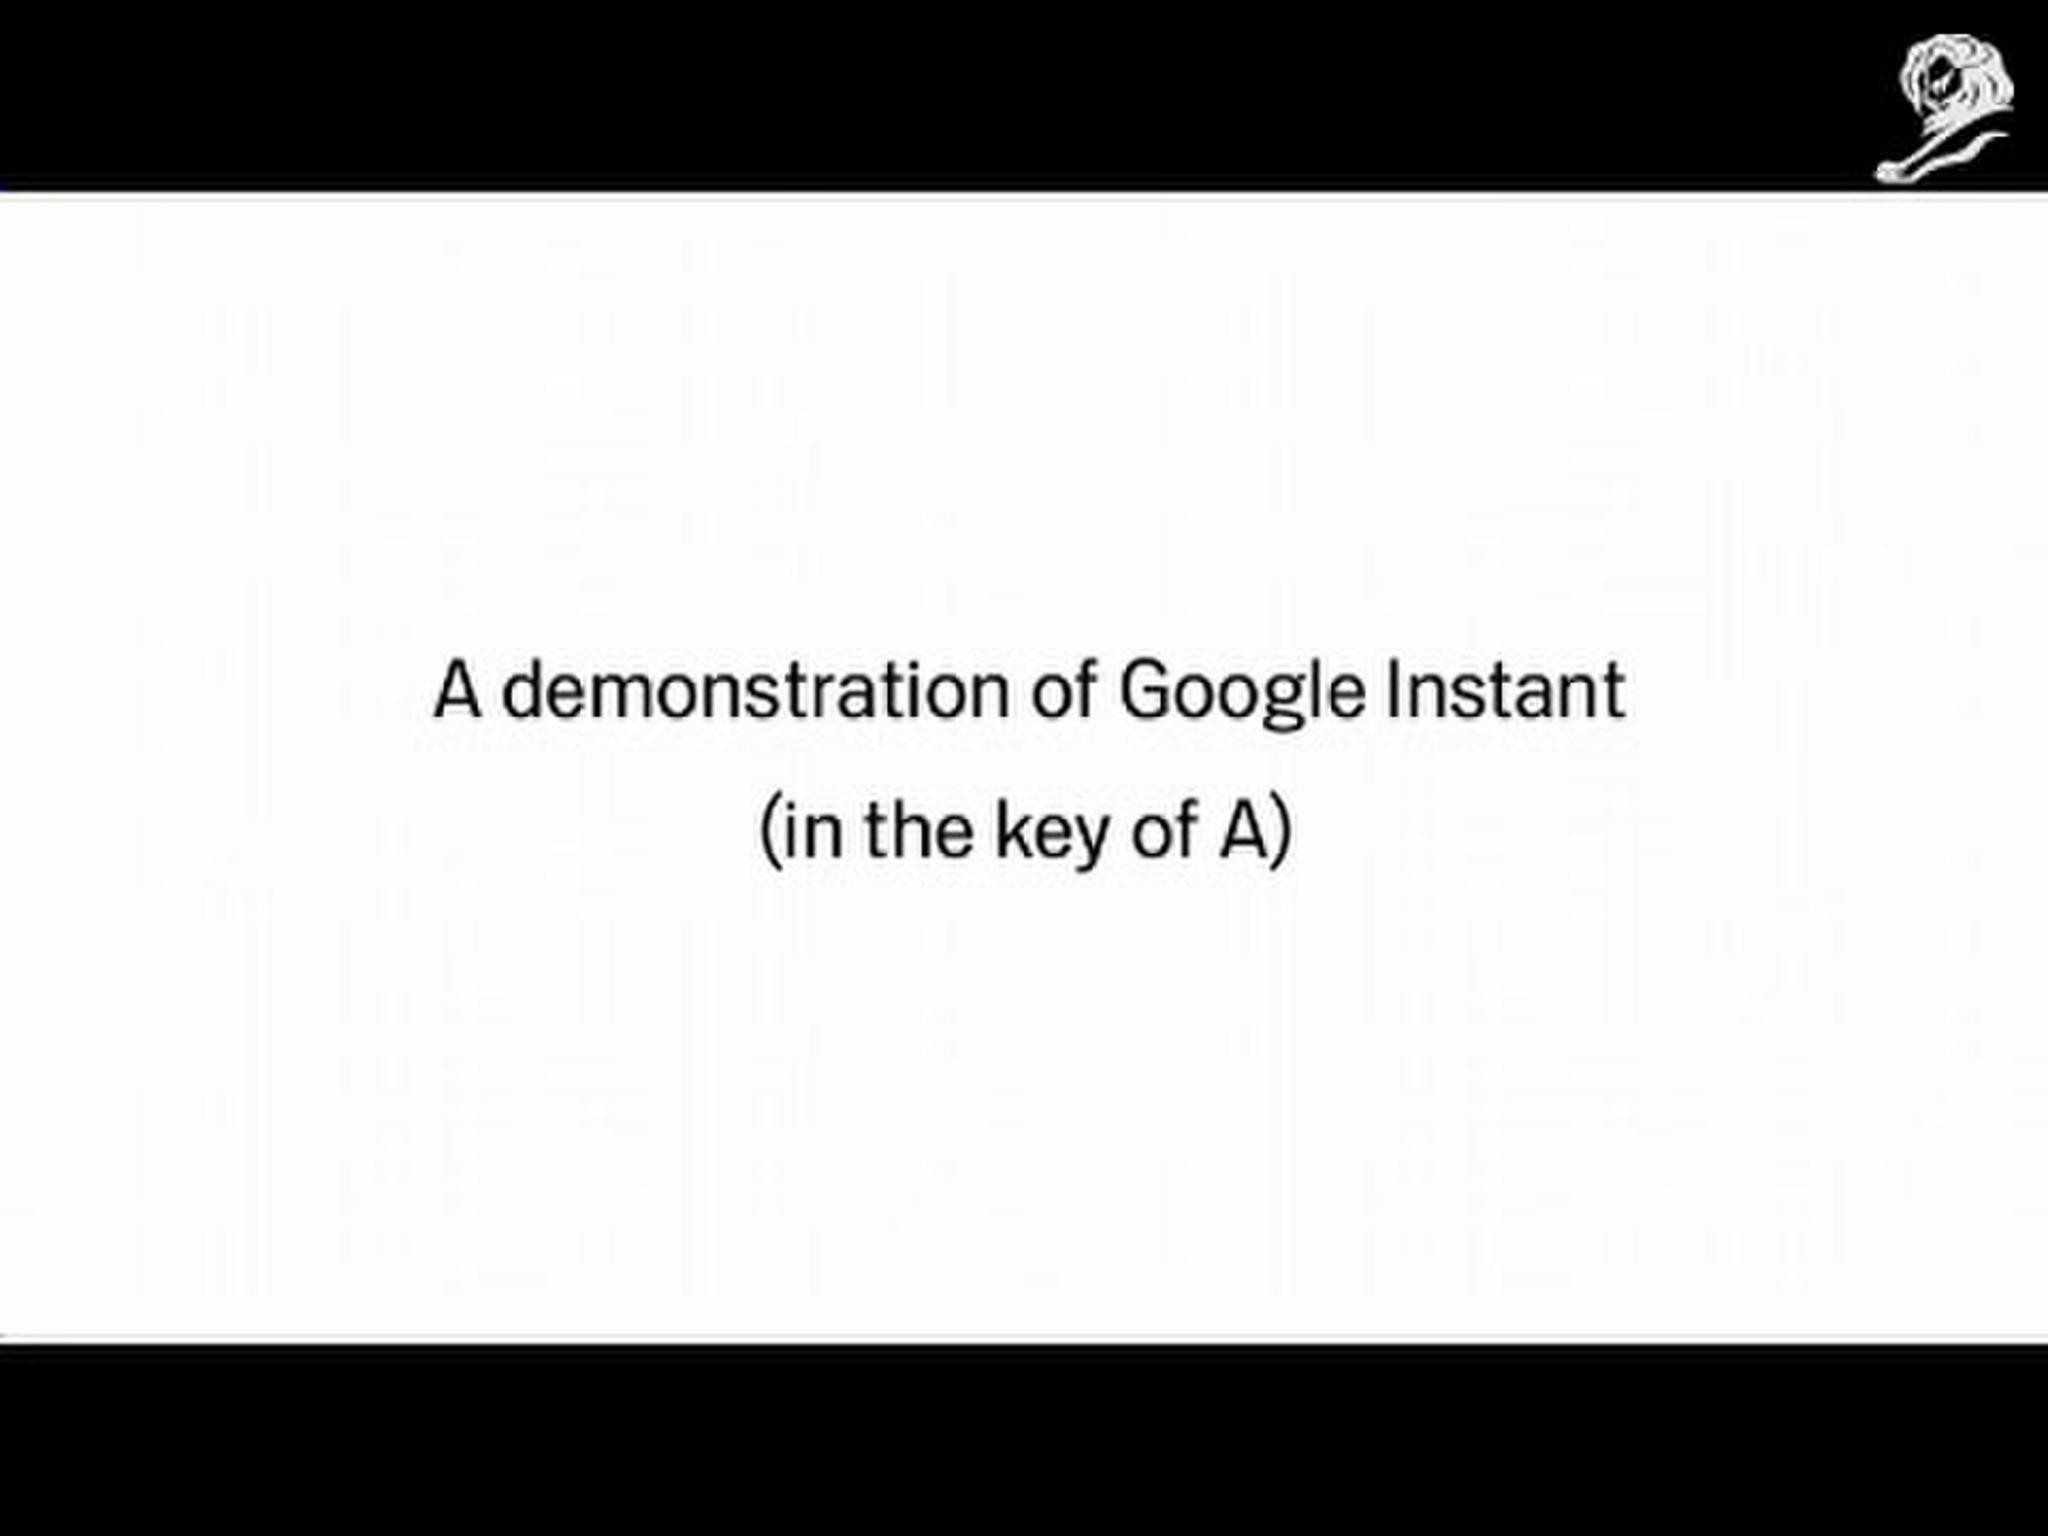 GOOGLE INSTANT WITH BOB DYLAN